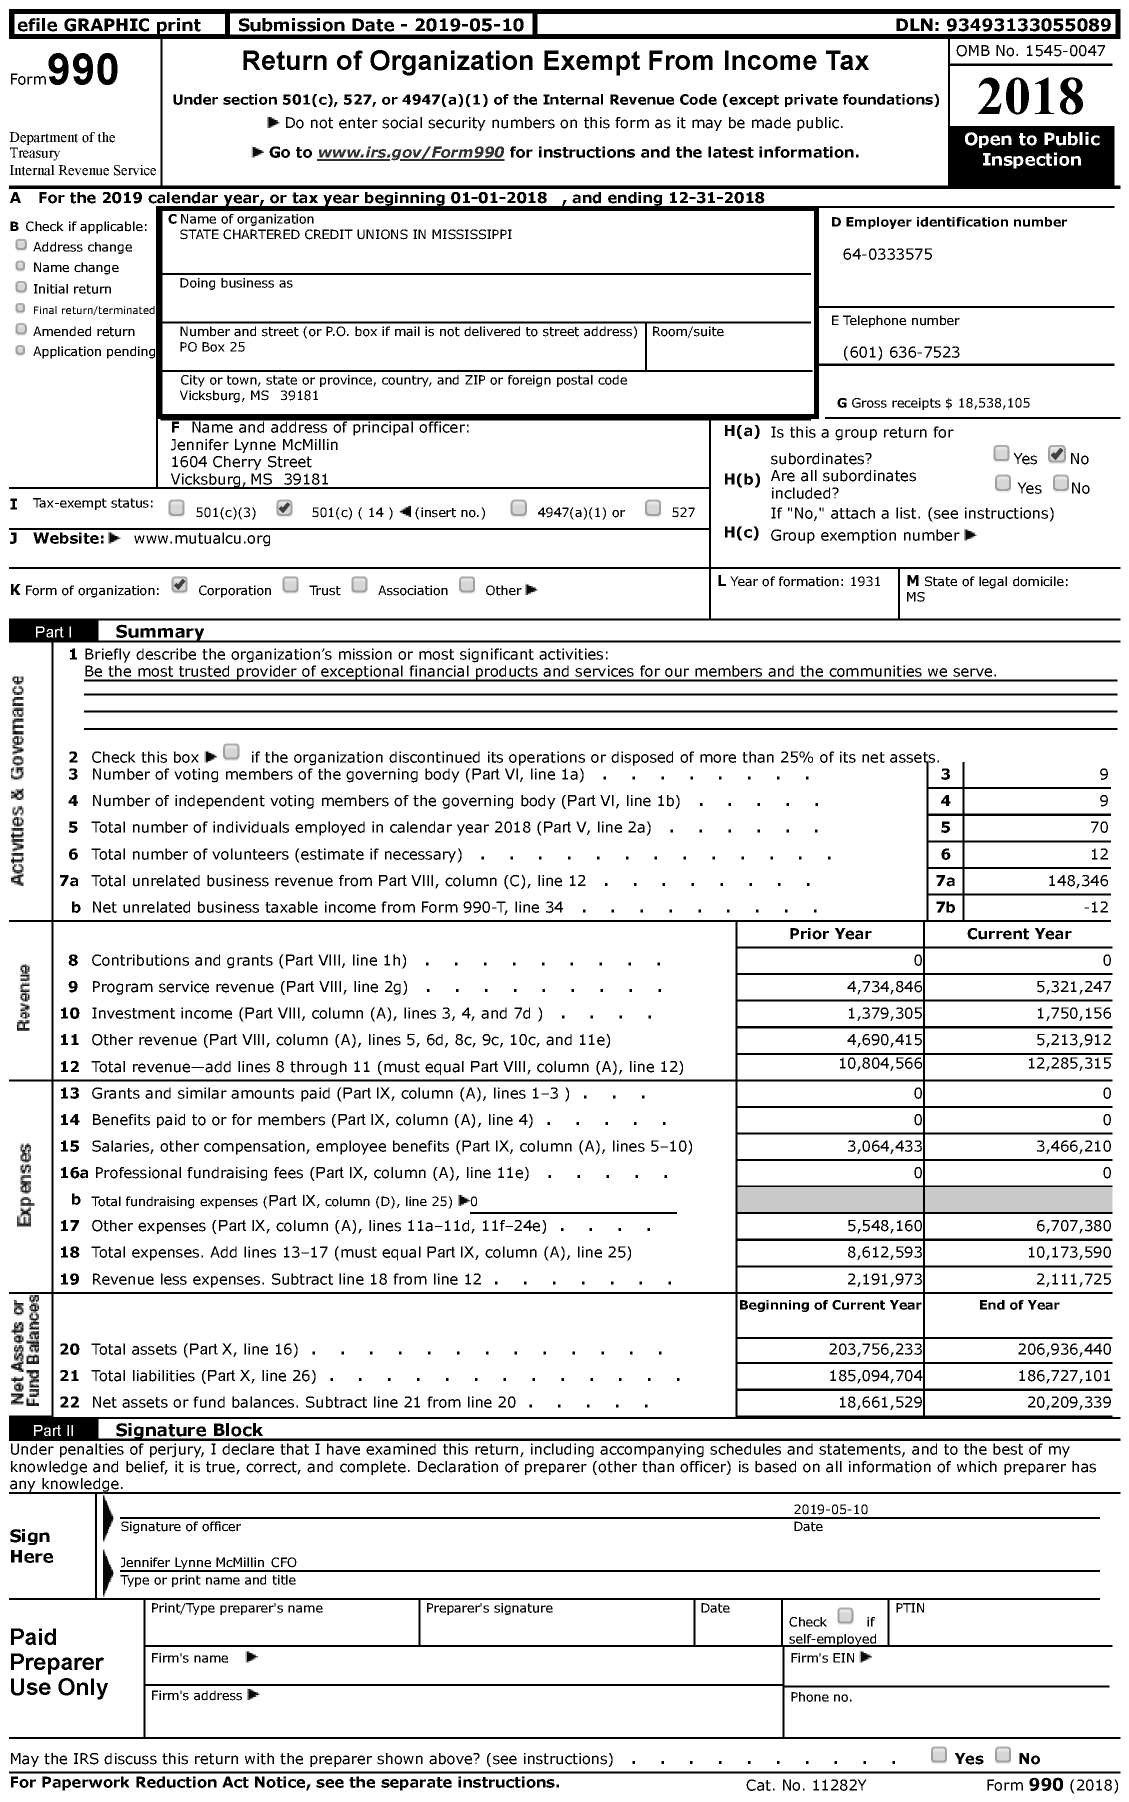 Image of first page of 2018 Form 990 for Mutual Credit Union (MCU)